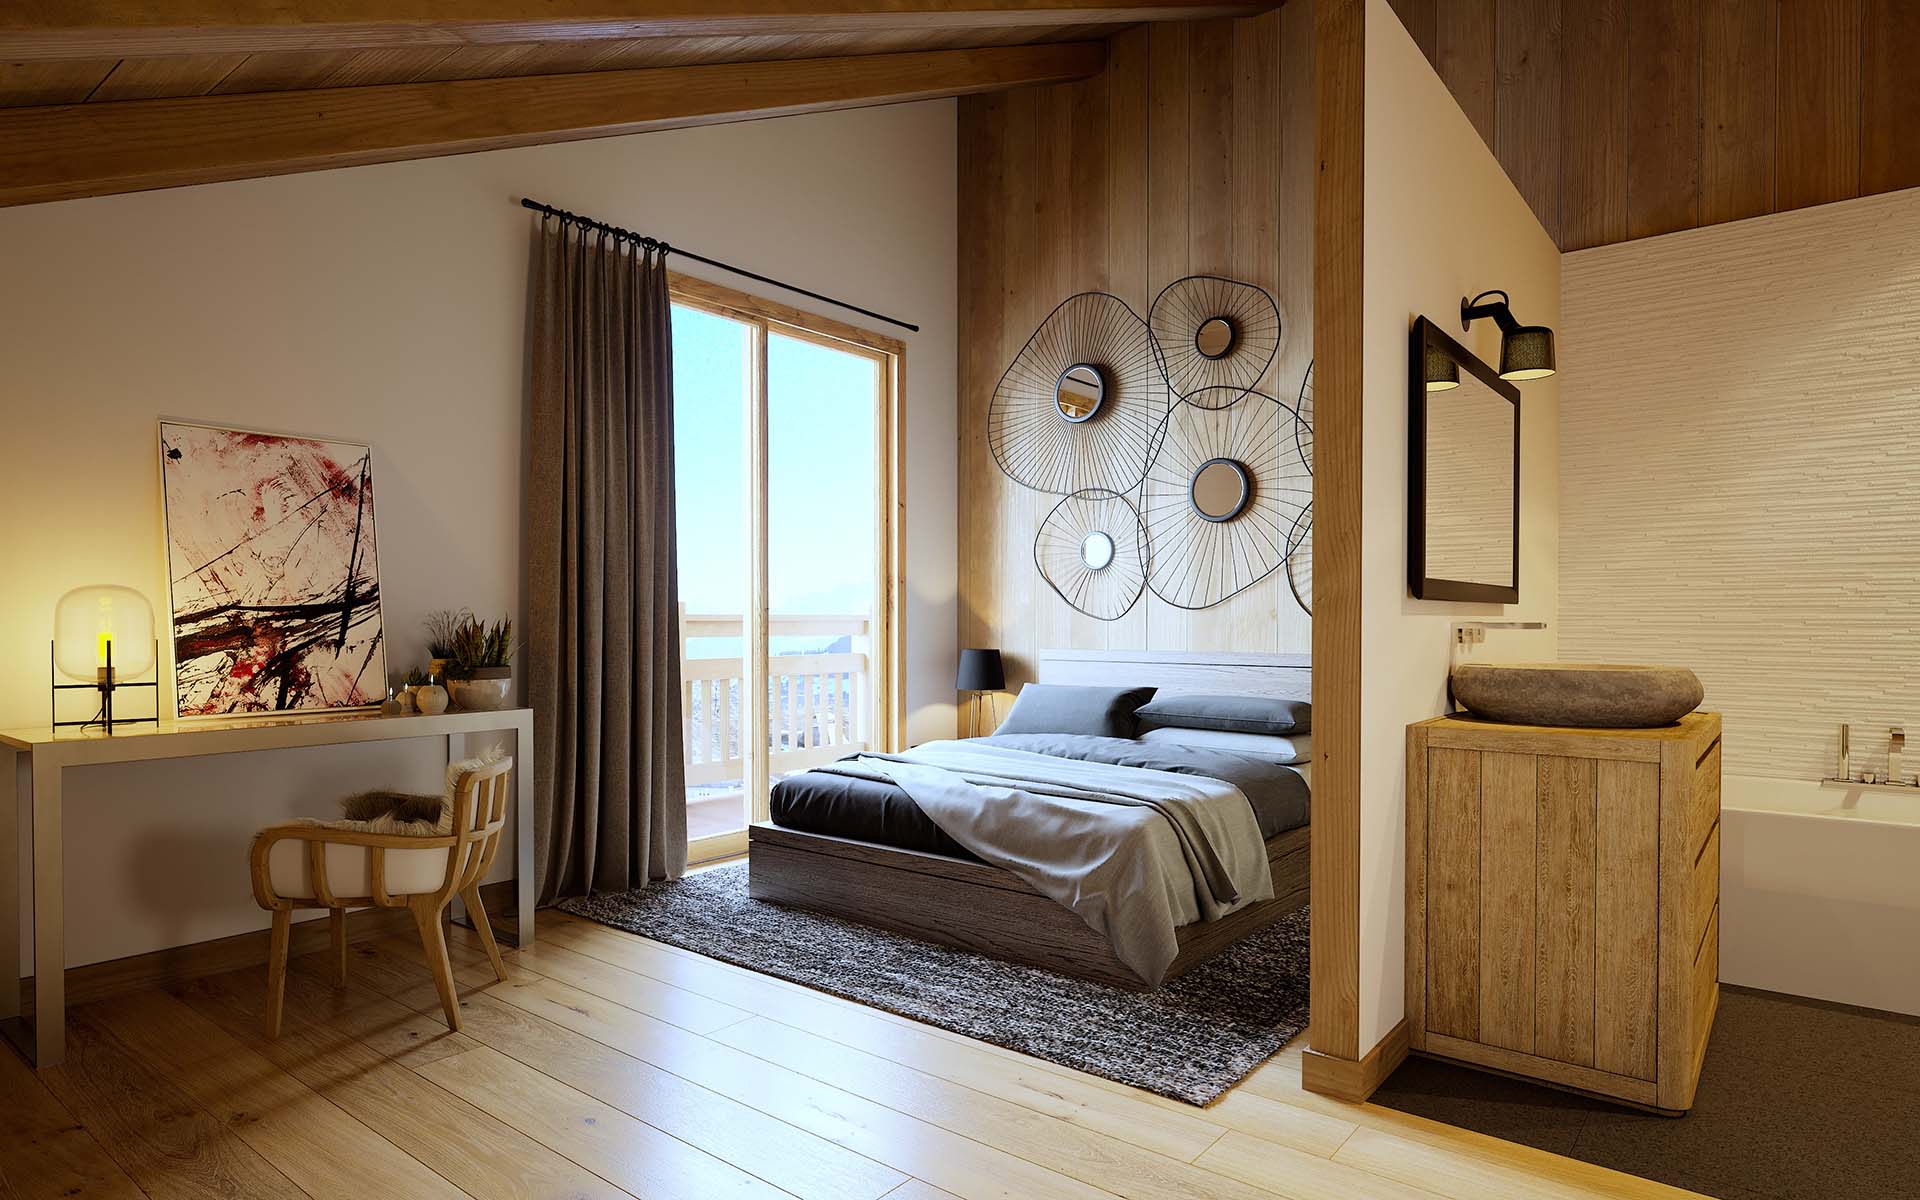 3D Image of a room of a luxurious chalet produced by professional 3D computer graphic designers agency. 